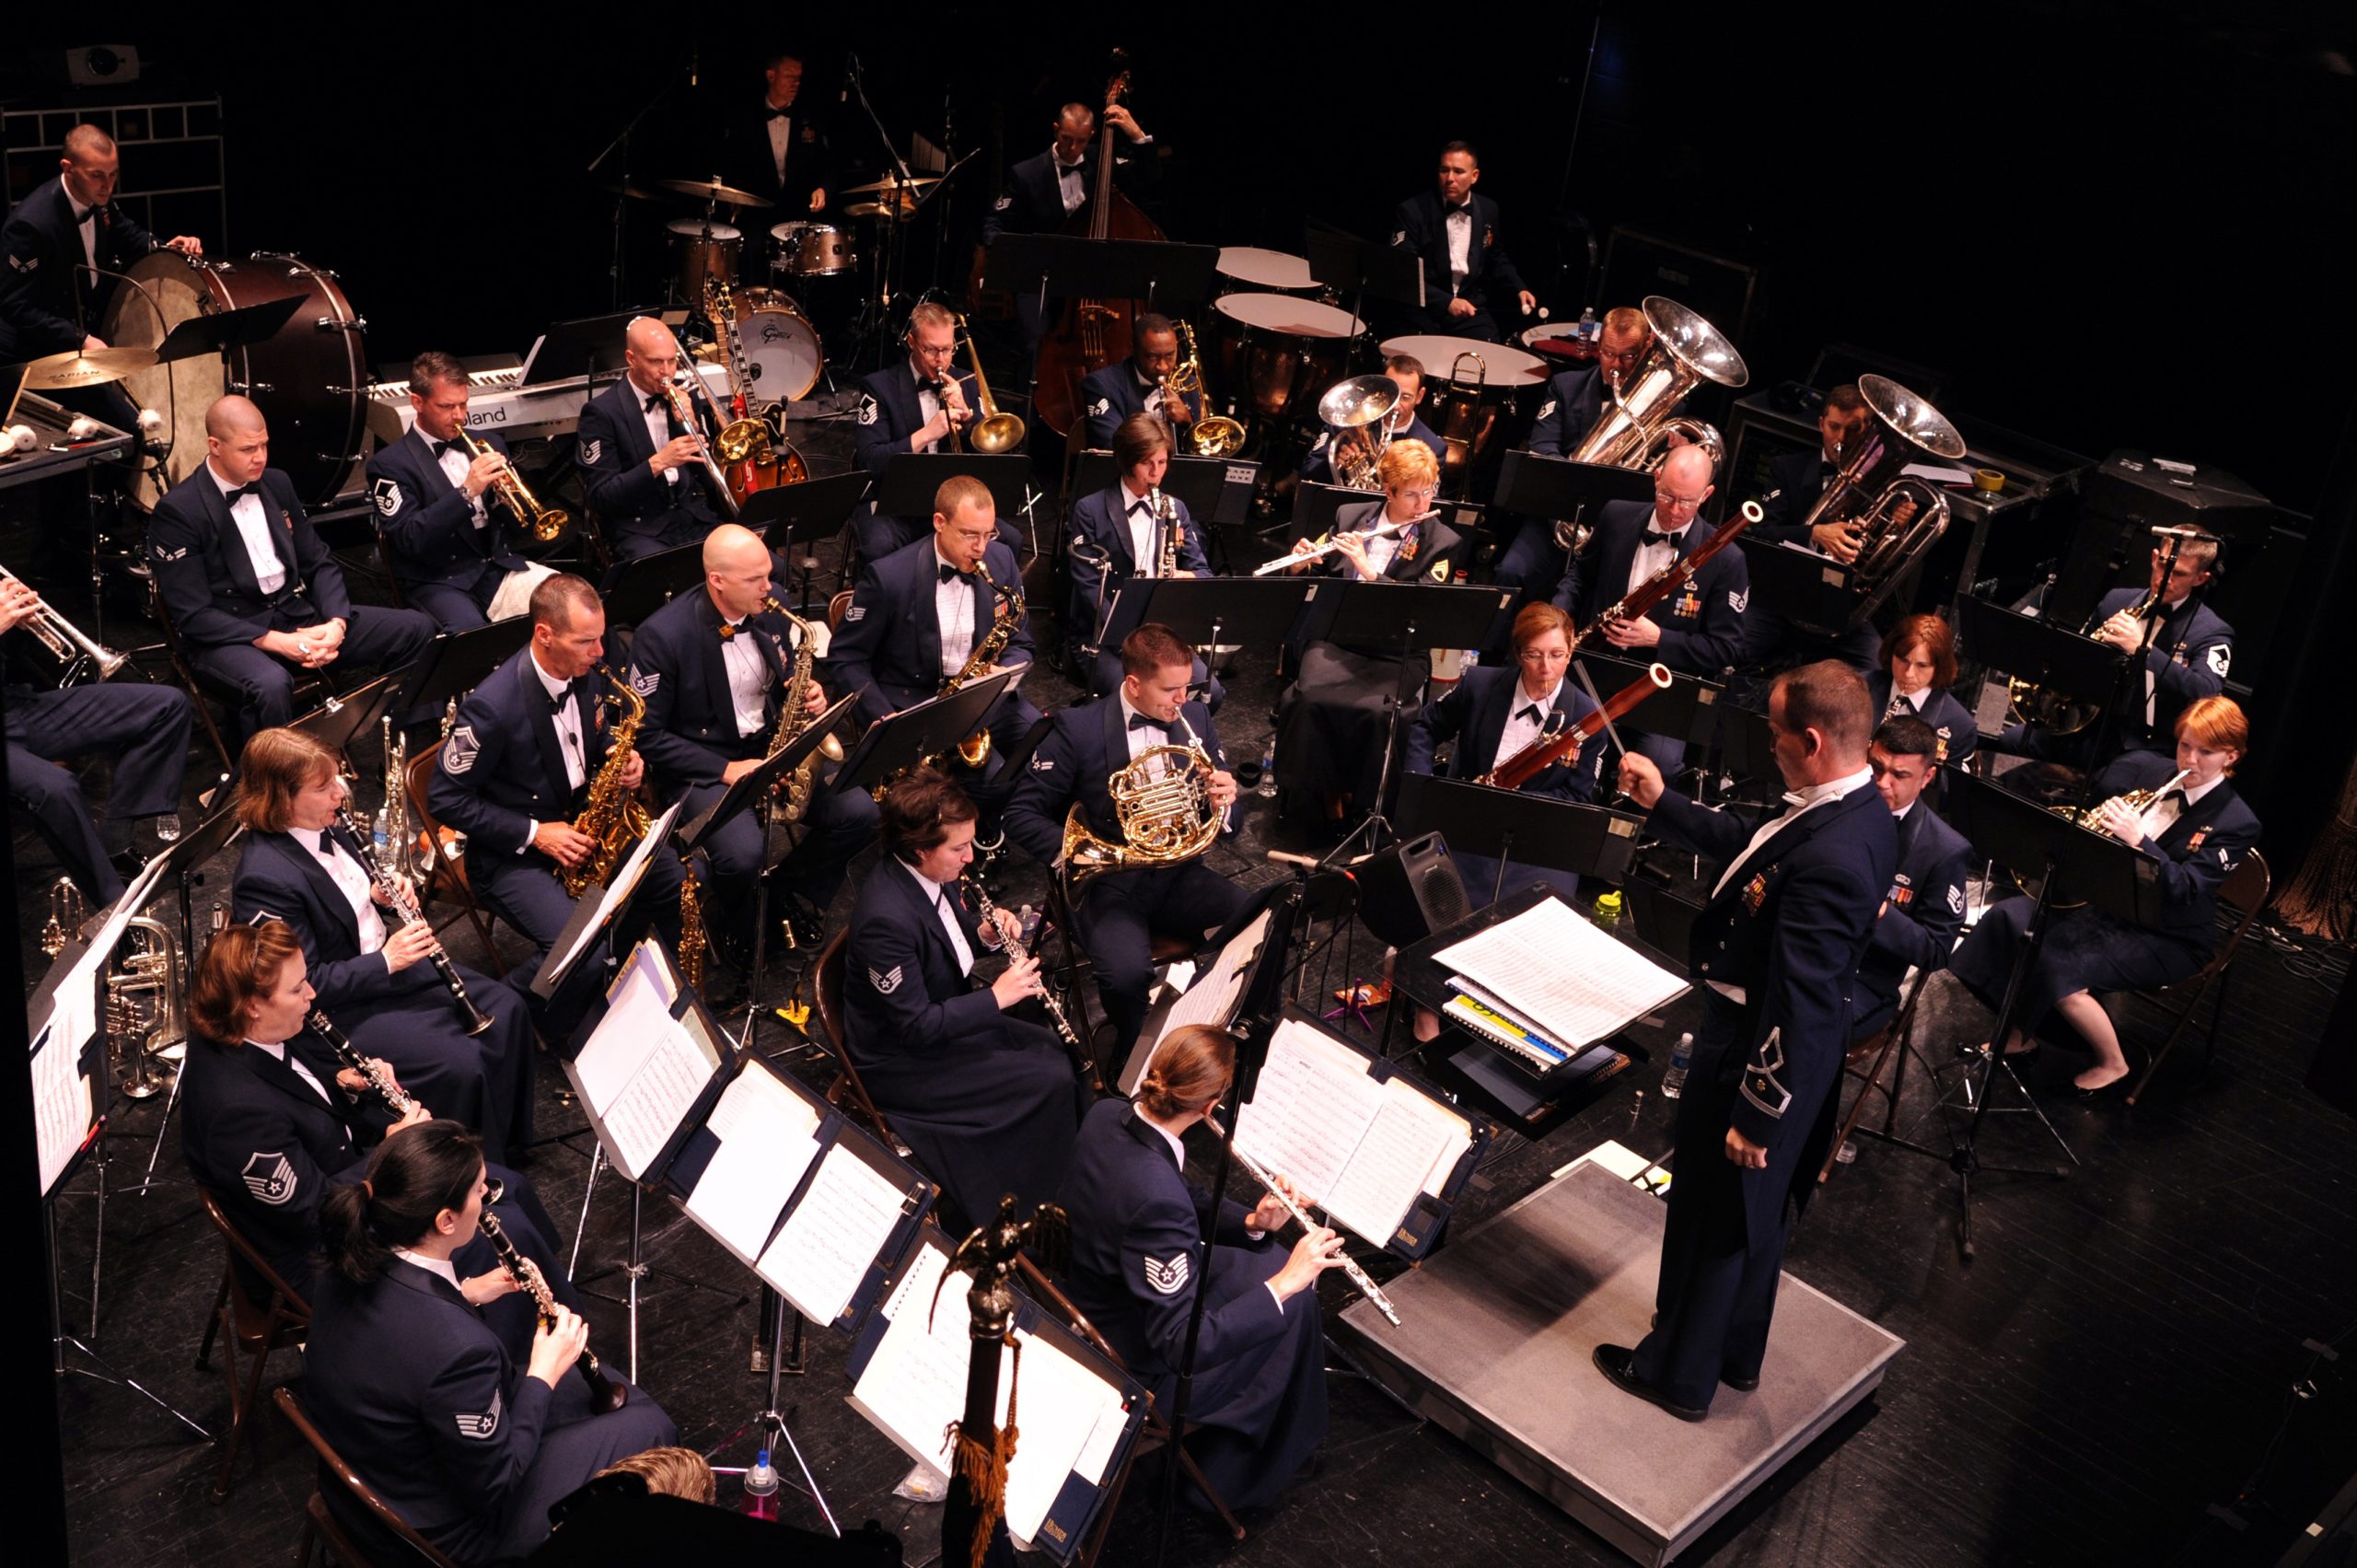 UPDATED: U.S. Air Force band holiday concert at COA-Elizabeth City sold out